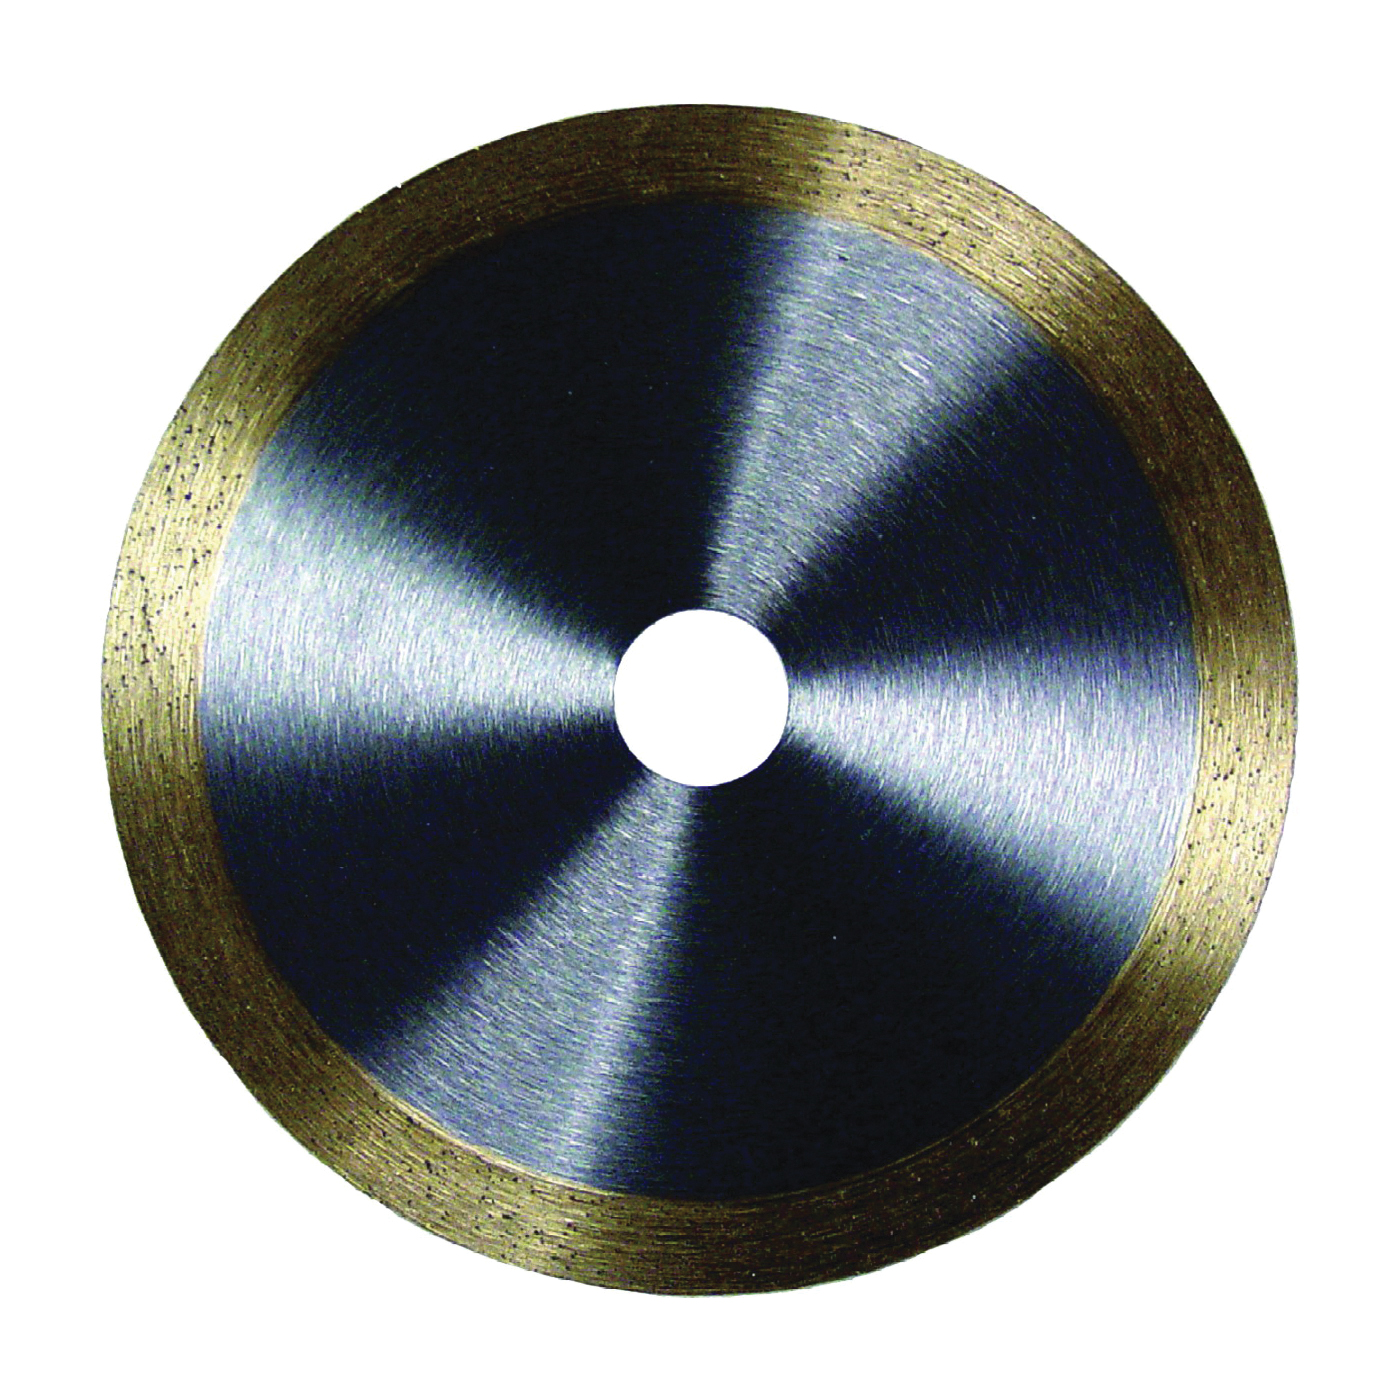 20675 Circular Saw Blade, 4-1/2 in Dia, 7/8 in Arbor, Applicable Materials: Tile